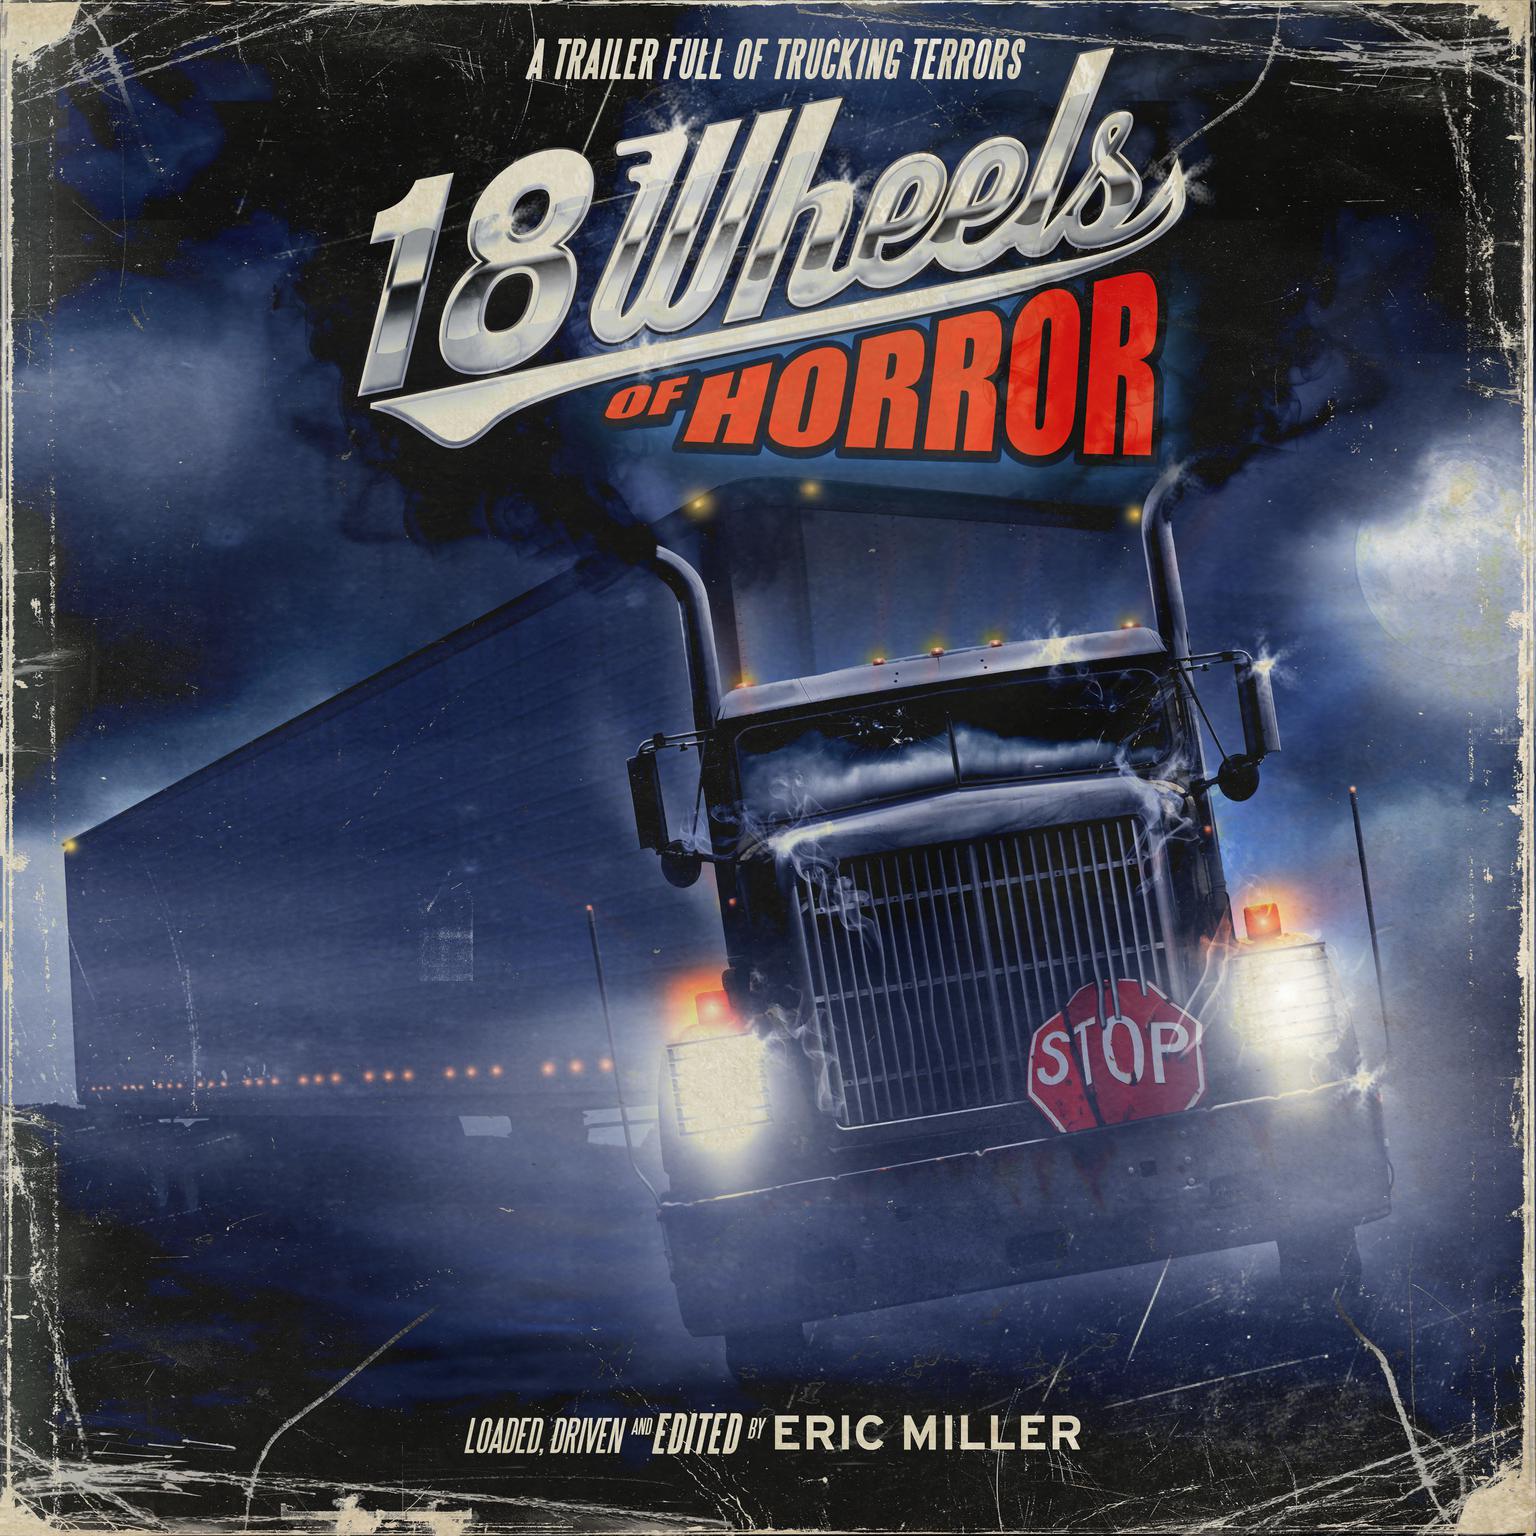 18 Wheels of Horror: A Trailer Full of Trucking Terrors Audiobook, by various authors